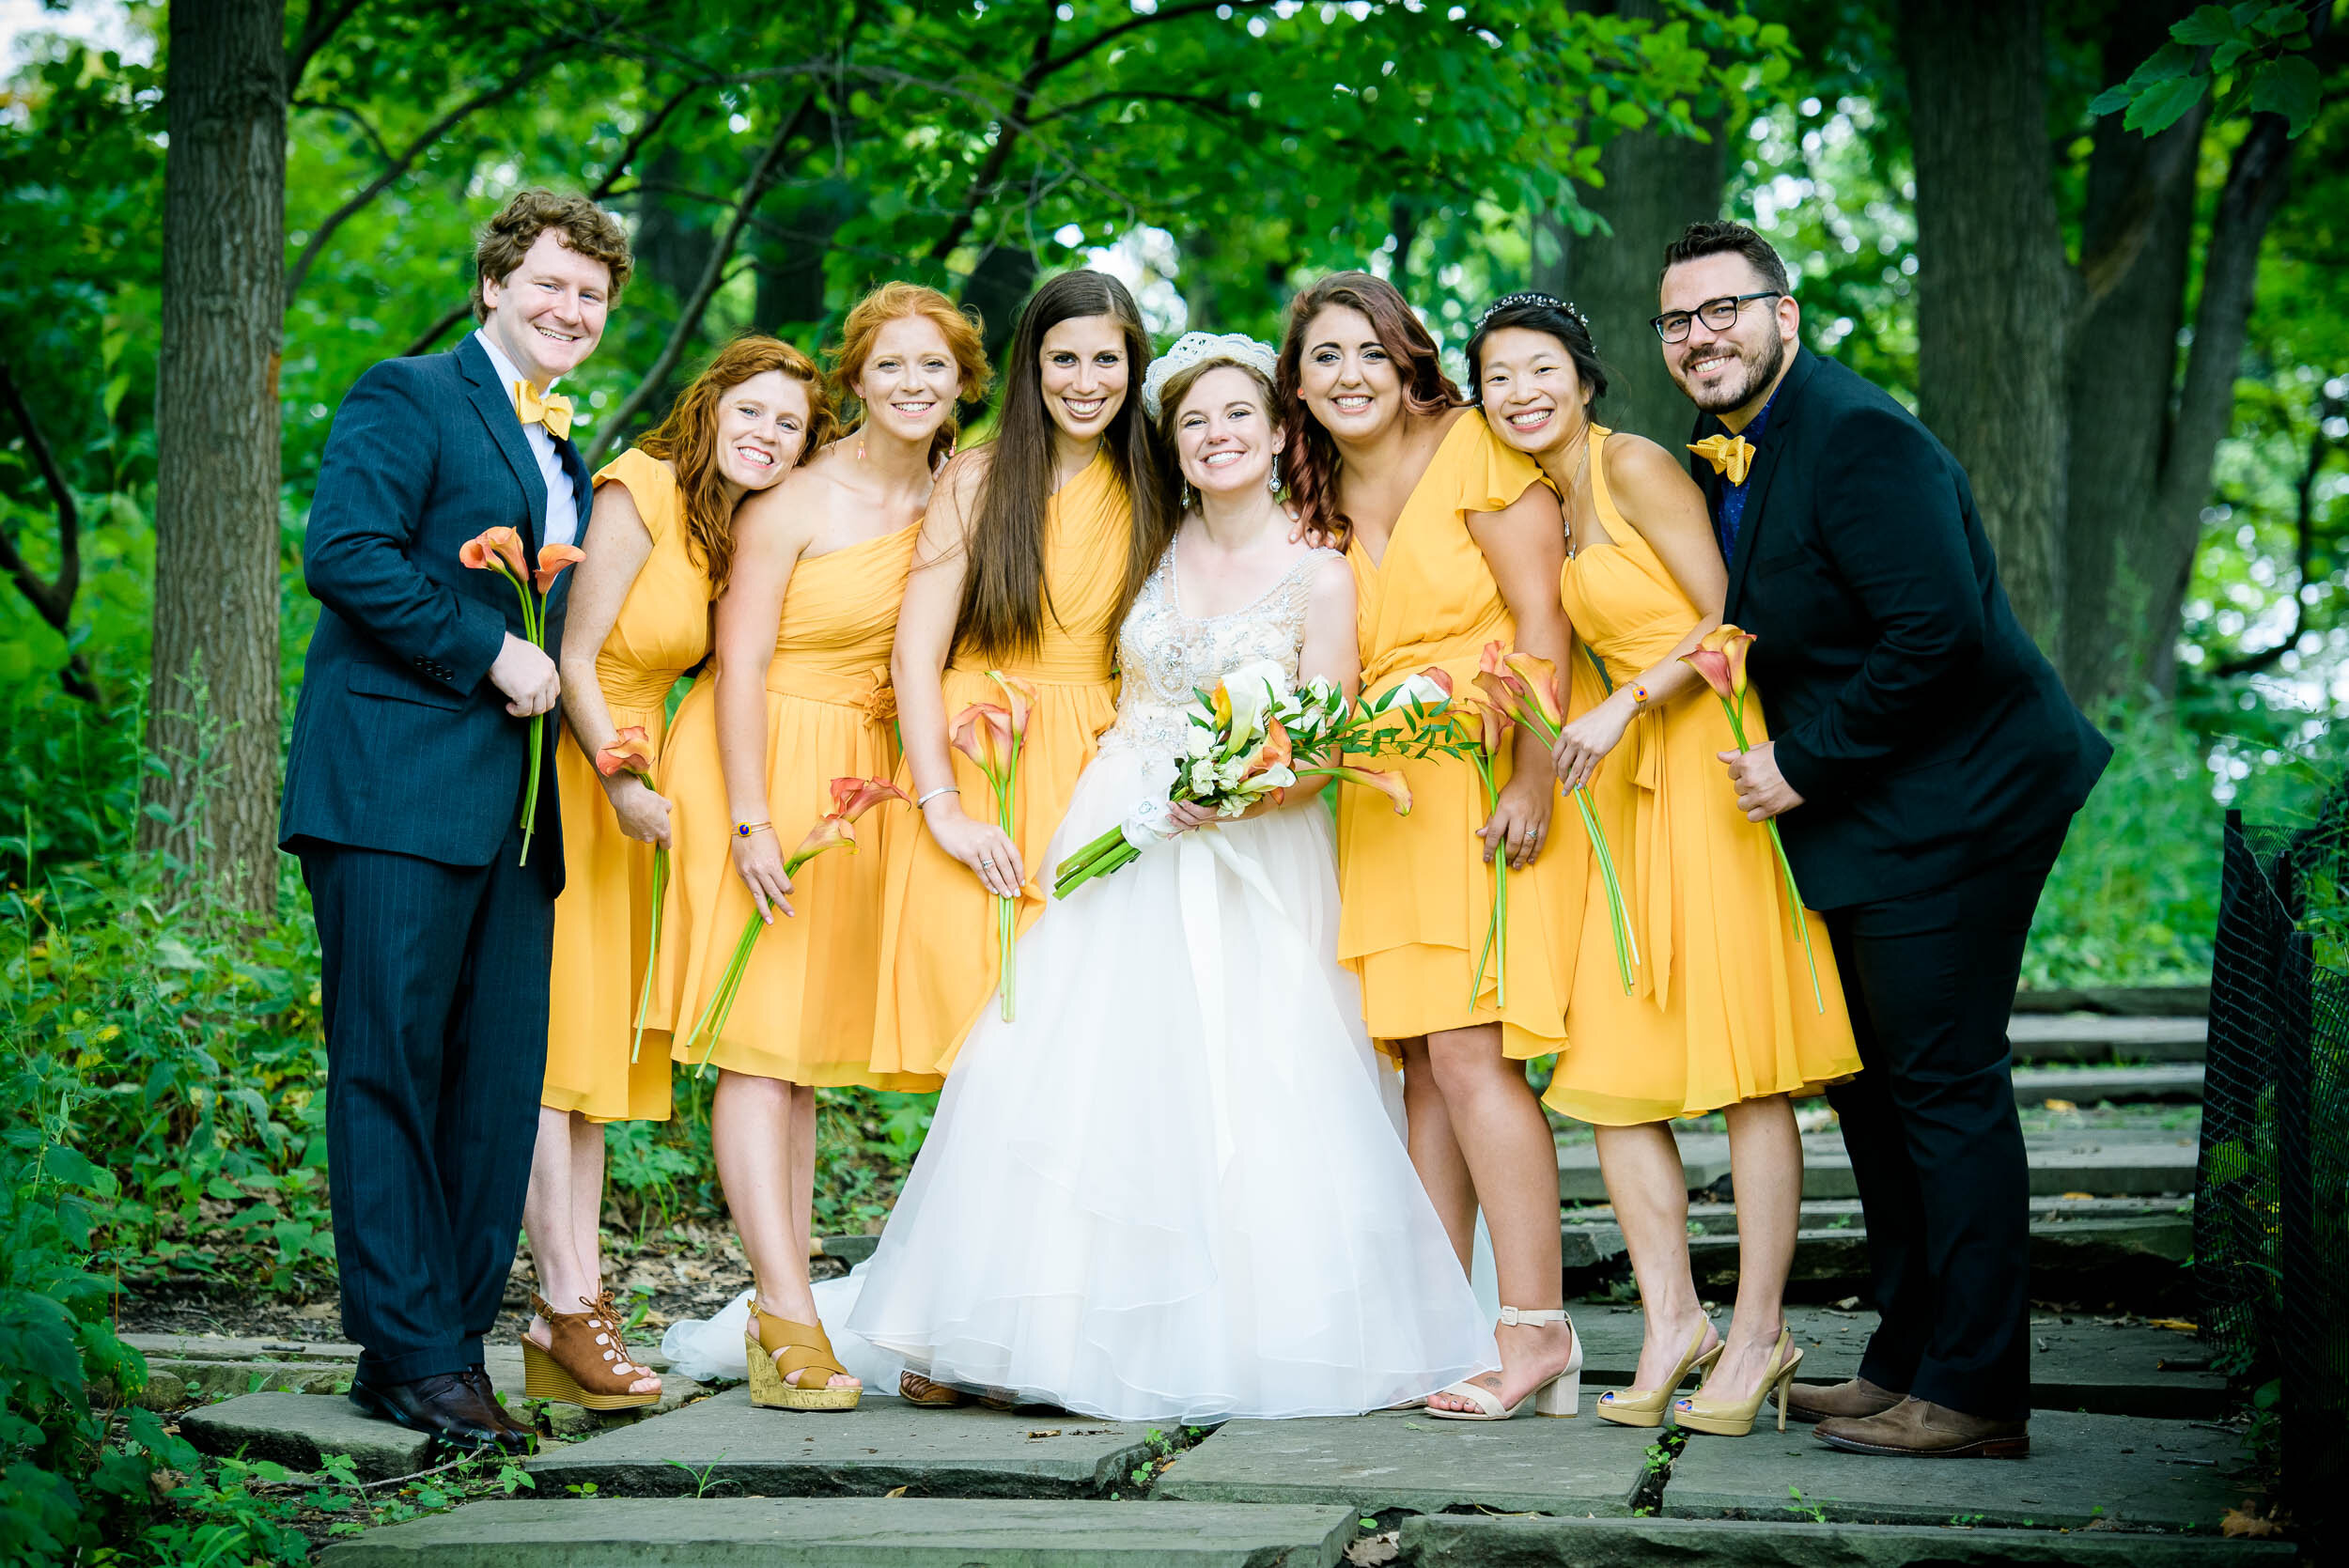 Outdoor wedding party portrait: Columbus Park Refectory Chicago wedding captured by J. Brown Photography.